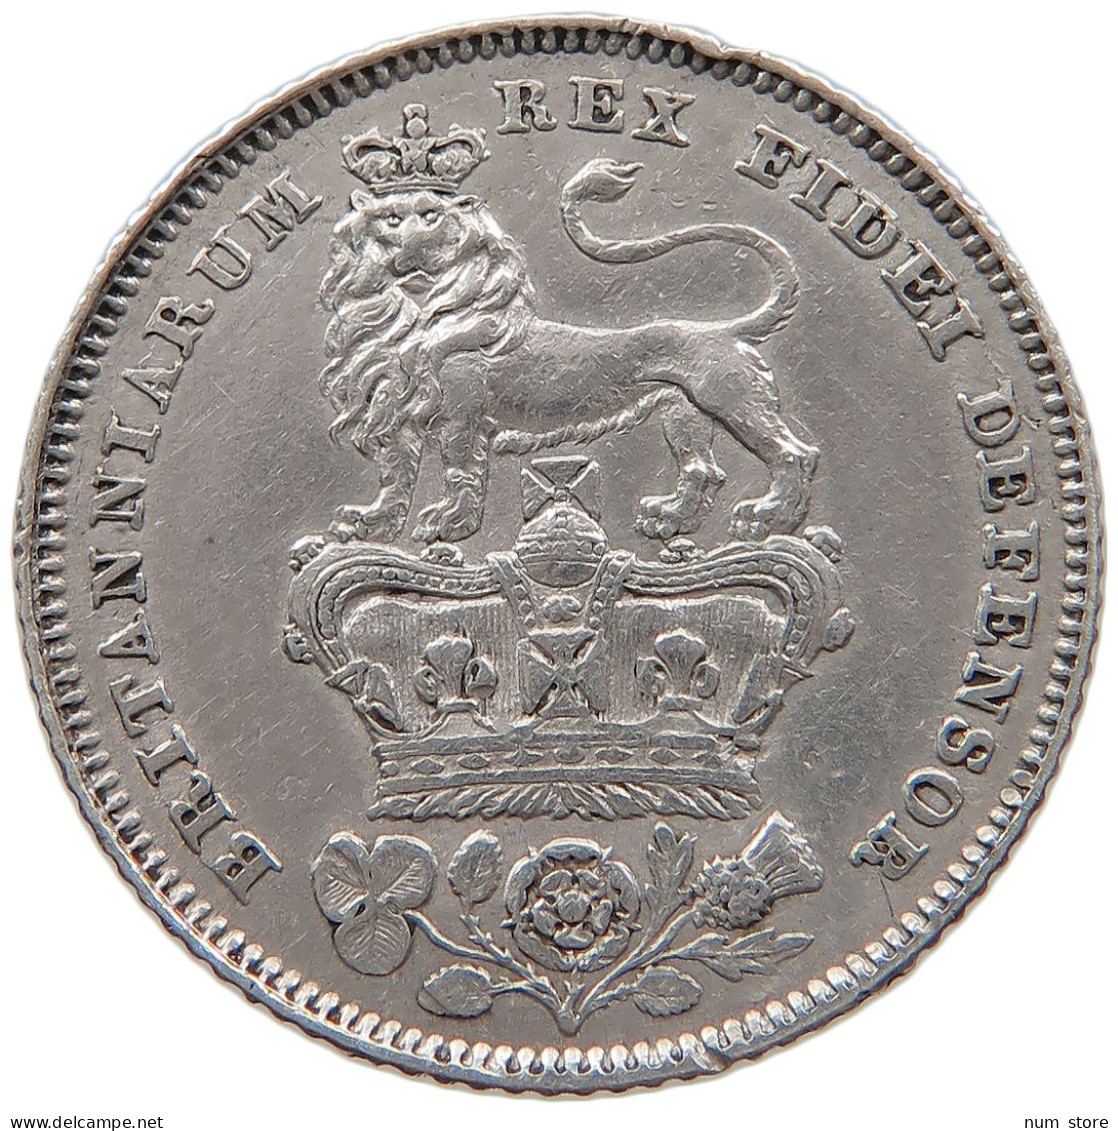 GREAT BRITAIN SIXPENCE 1826 George IV. (1820-1830) #t143 0485 - H. 6 Pence